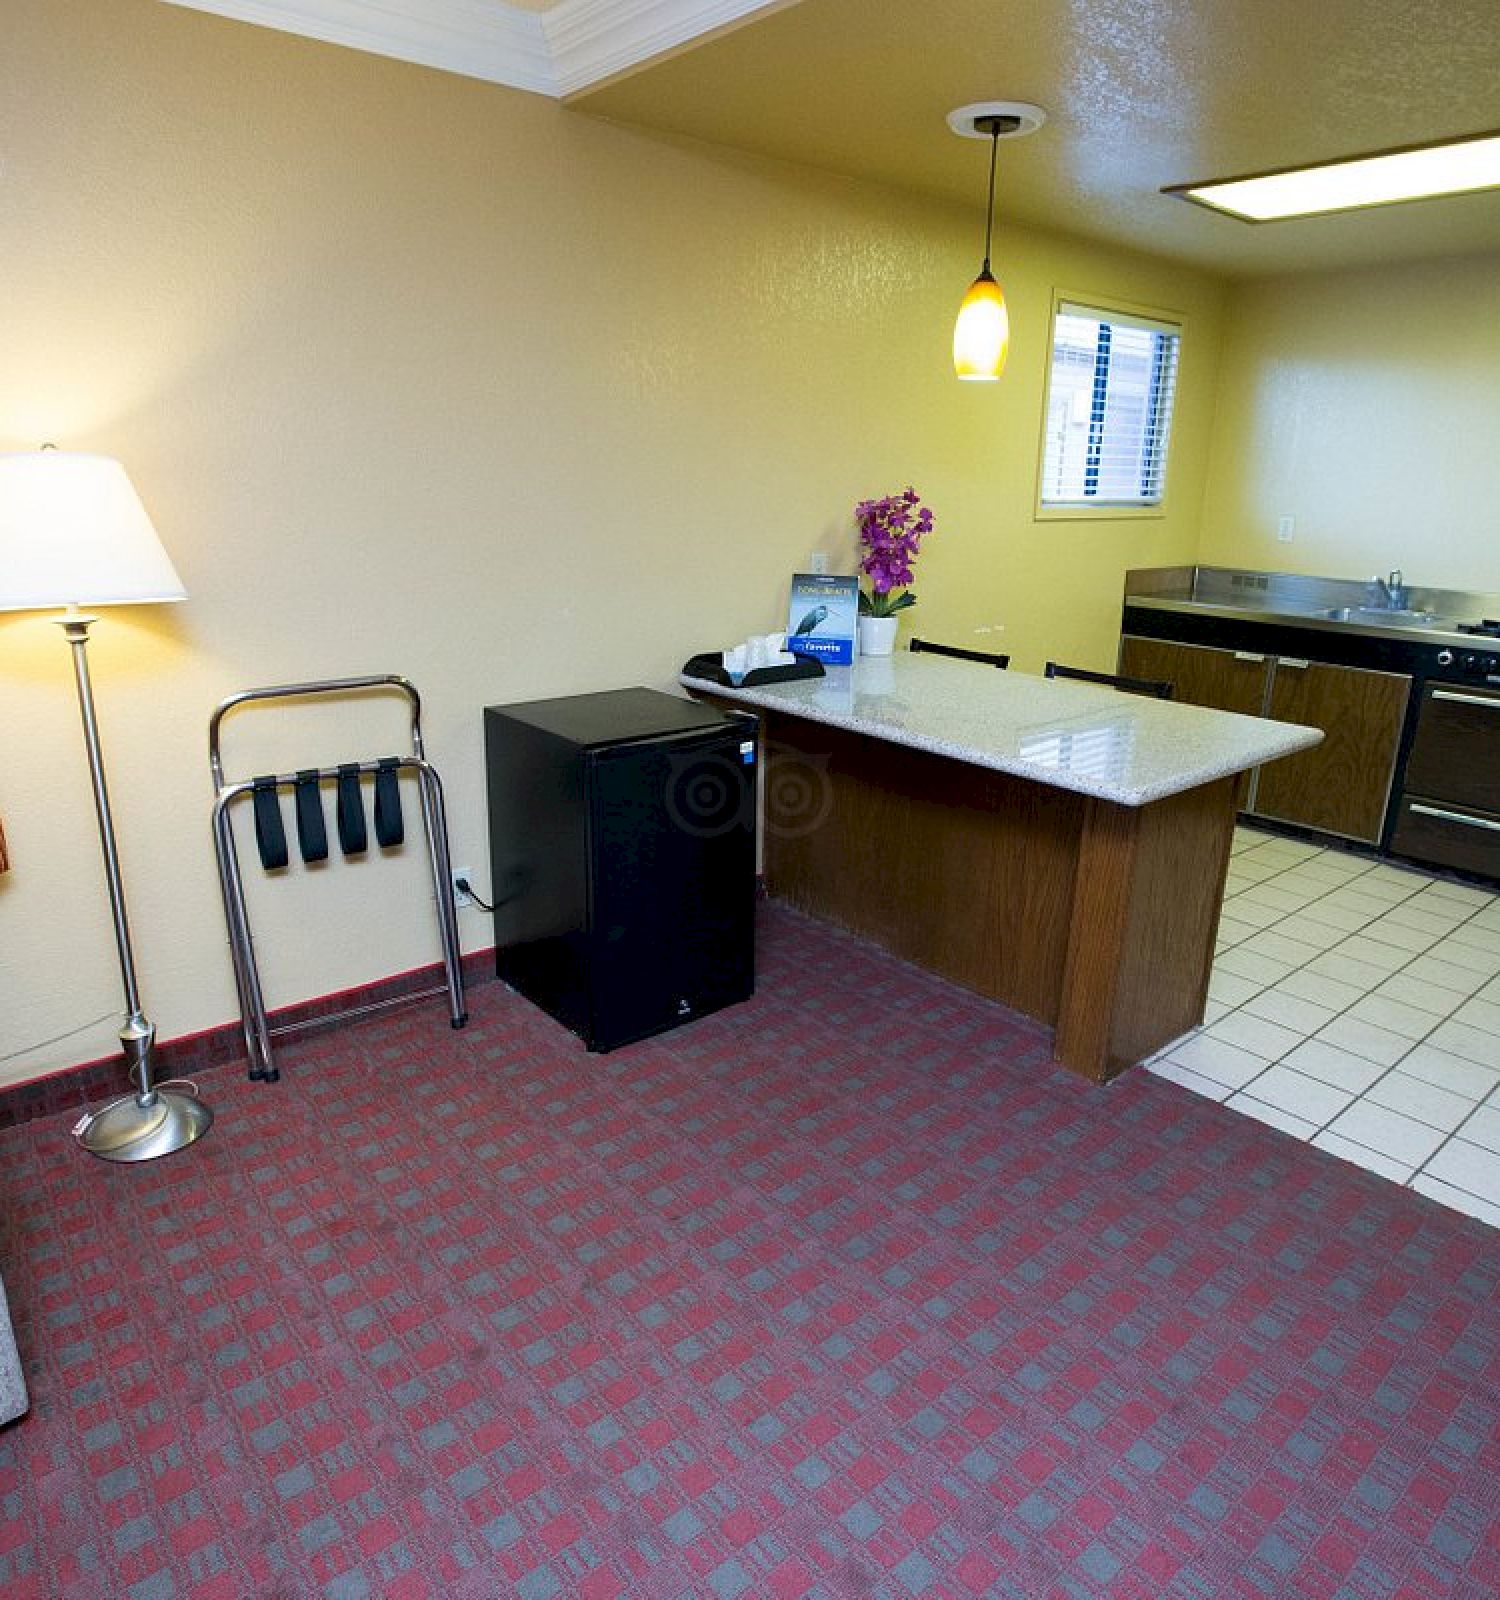 A cozy hotel room with a sofa, lamp, luggage rack, and kitchenette featuring a stove, microwave, and refrigerator.